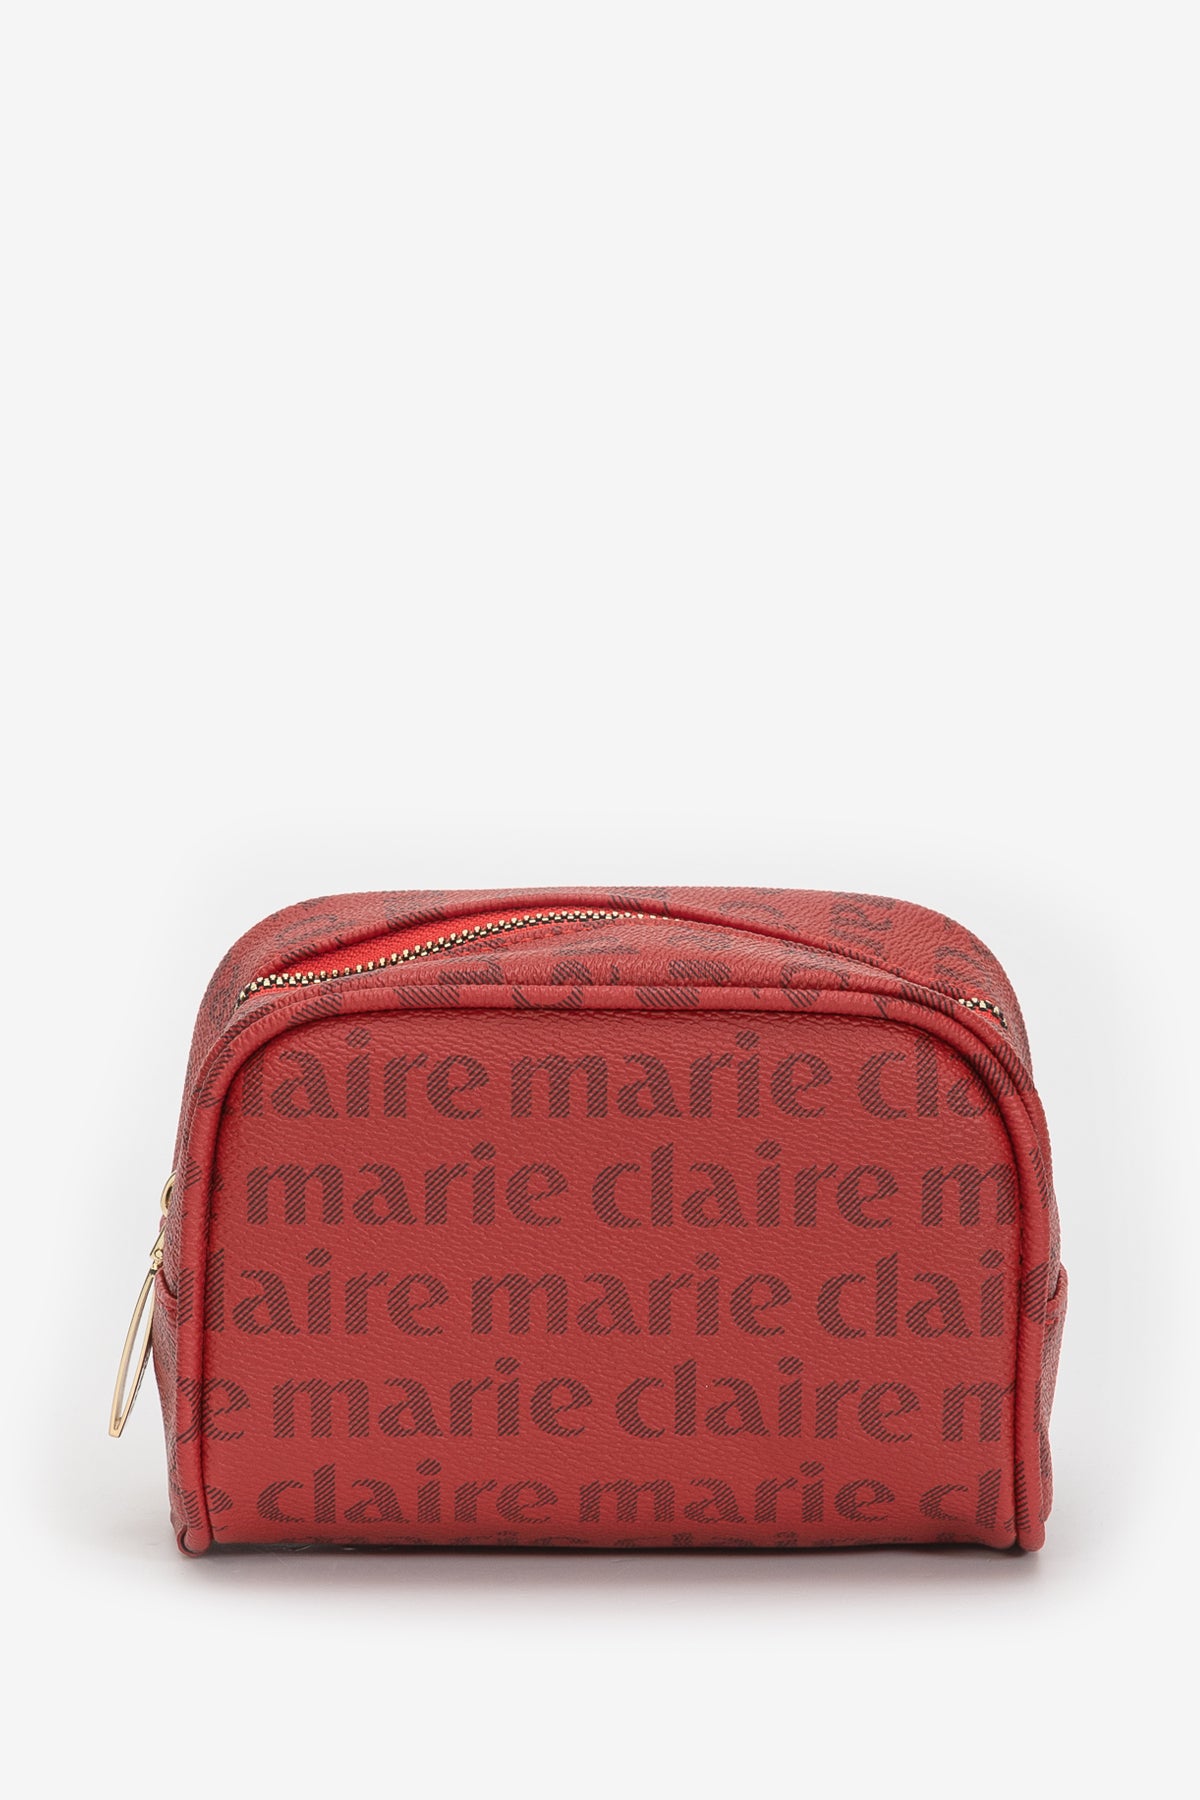 Ladies Handbags - Genuine Leather - Women's at Marie Claire - Online